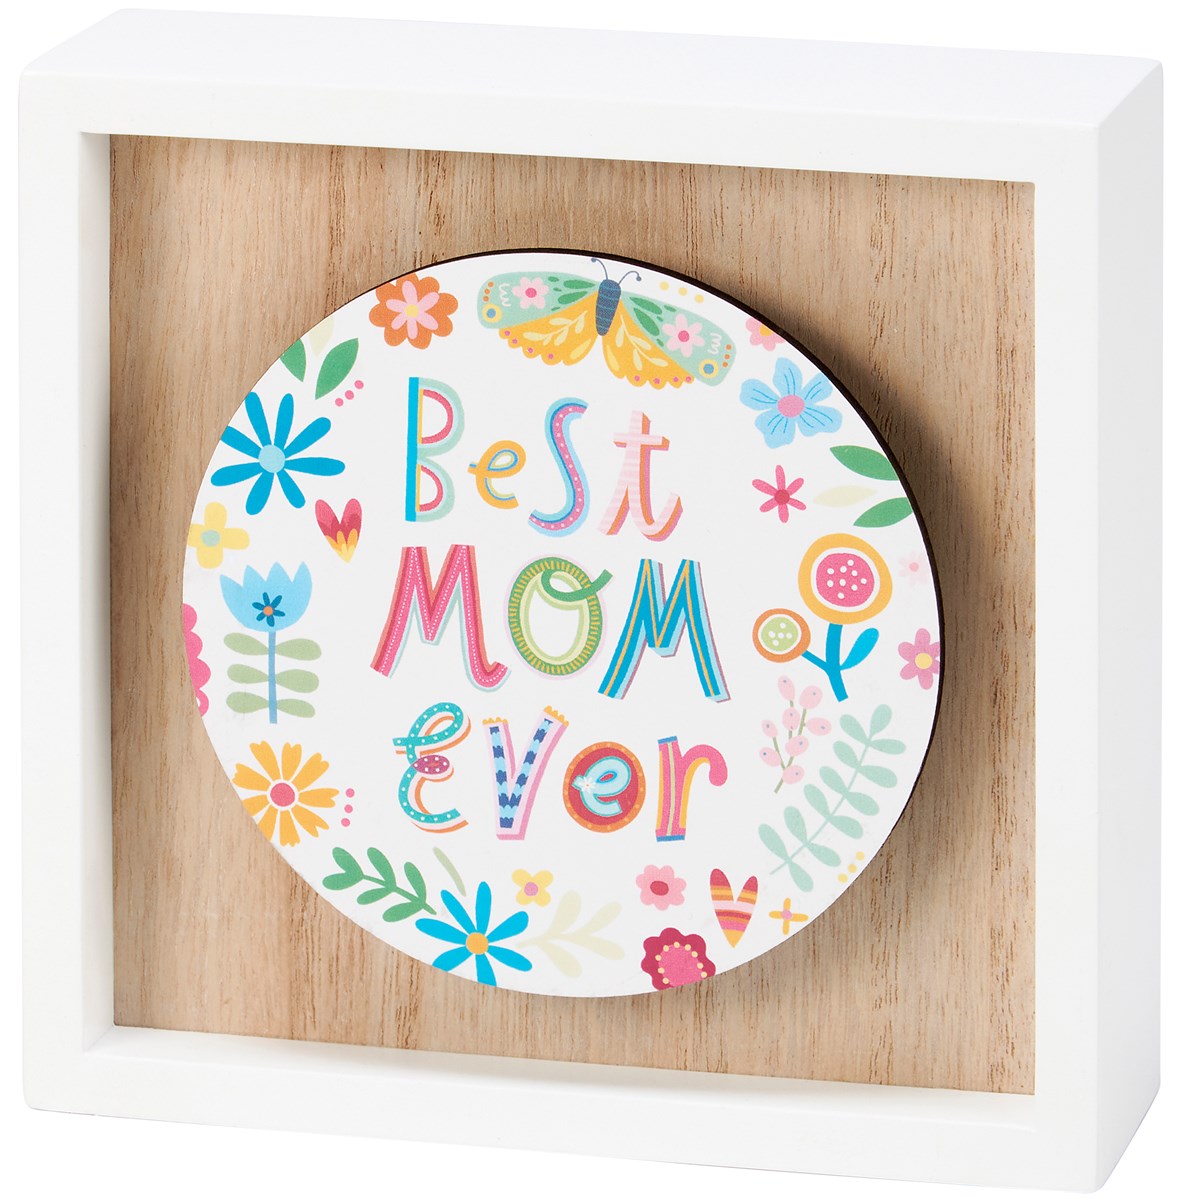 Best Mom Ever Inset Box Sign - Wood, Paper